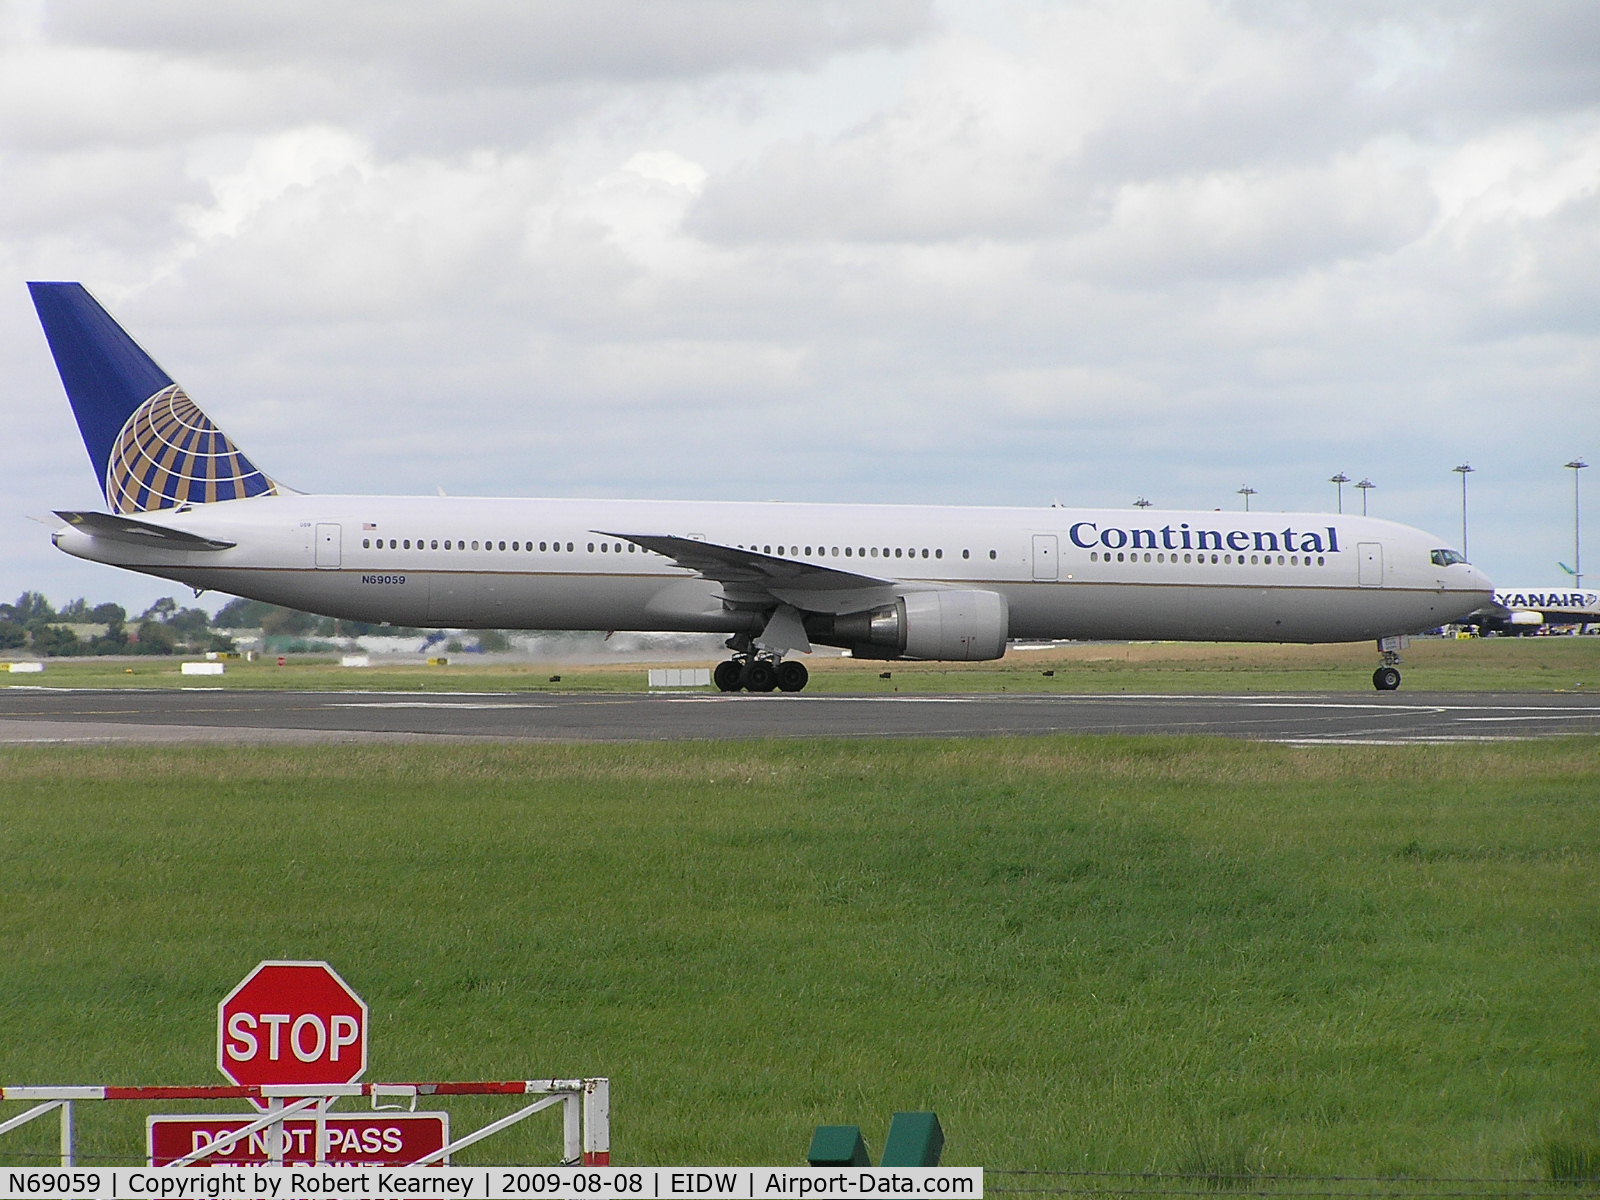 N69059, 2002 Boeing 767-424/ER C/N 29454, Continental going to stand